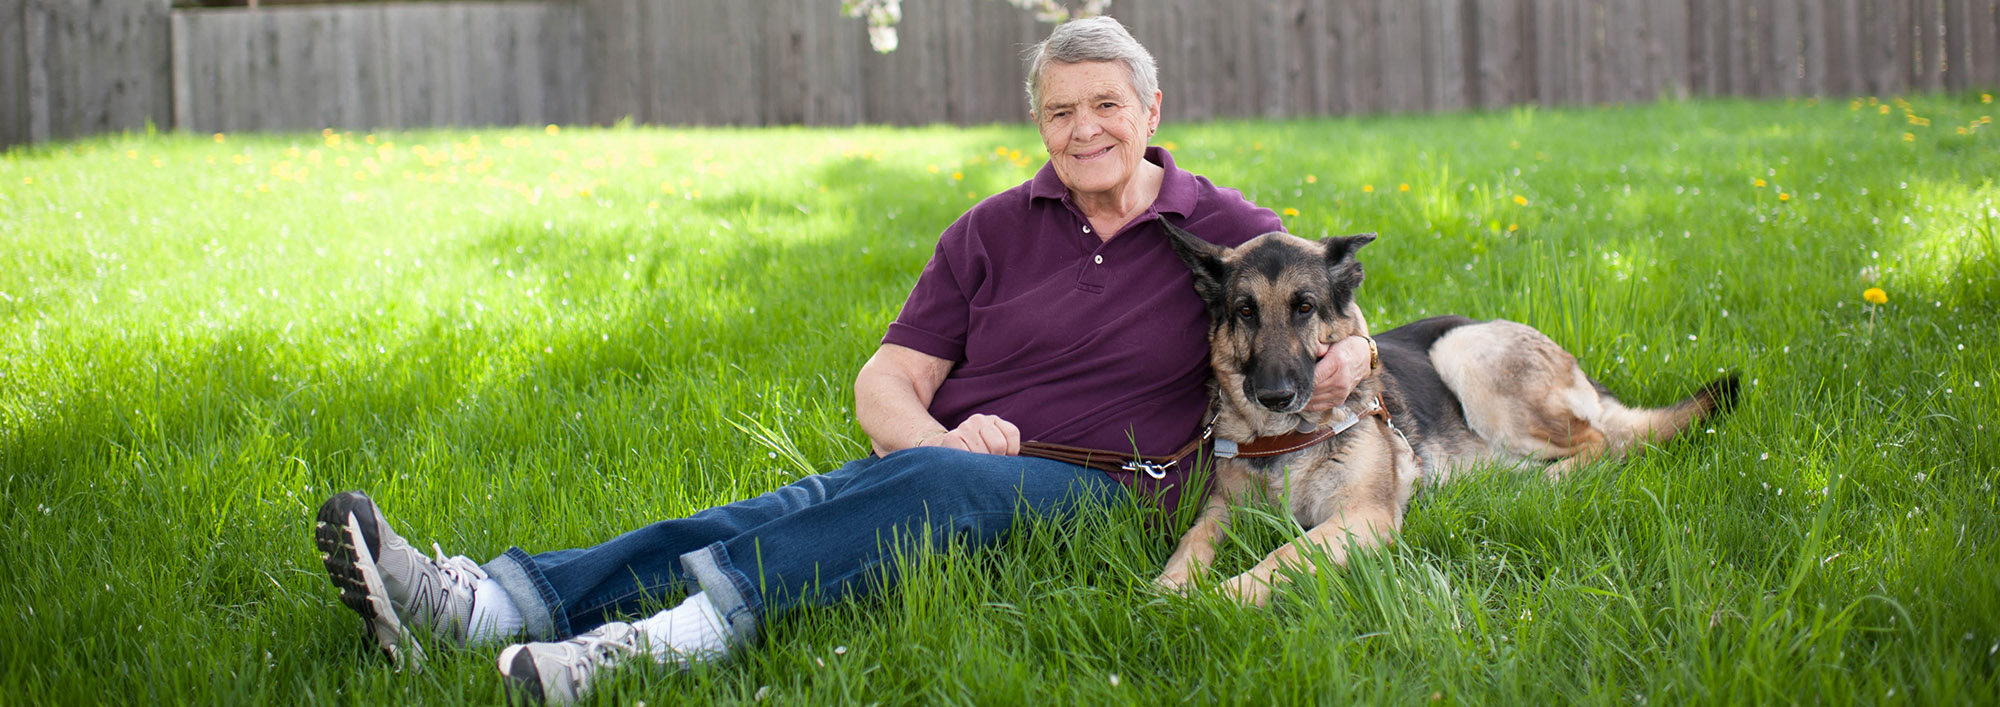 An older woman sits on grass on a sunny day, smiling at the camera. Her arm is around a German shepherd lying next to her. A wooden fence is visible in the background